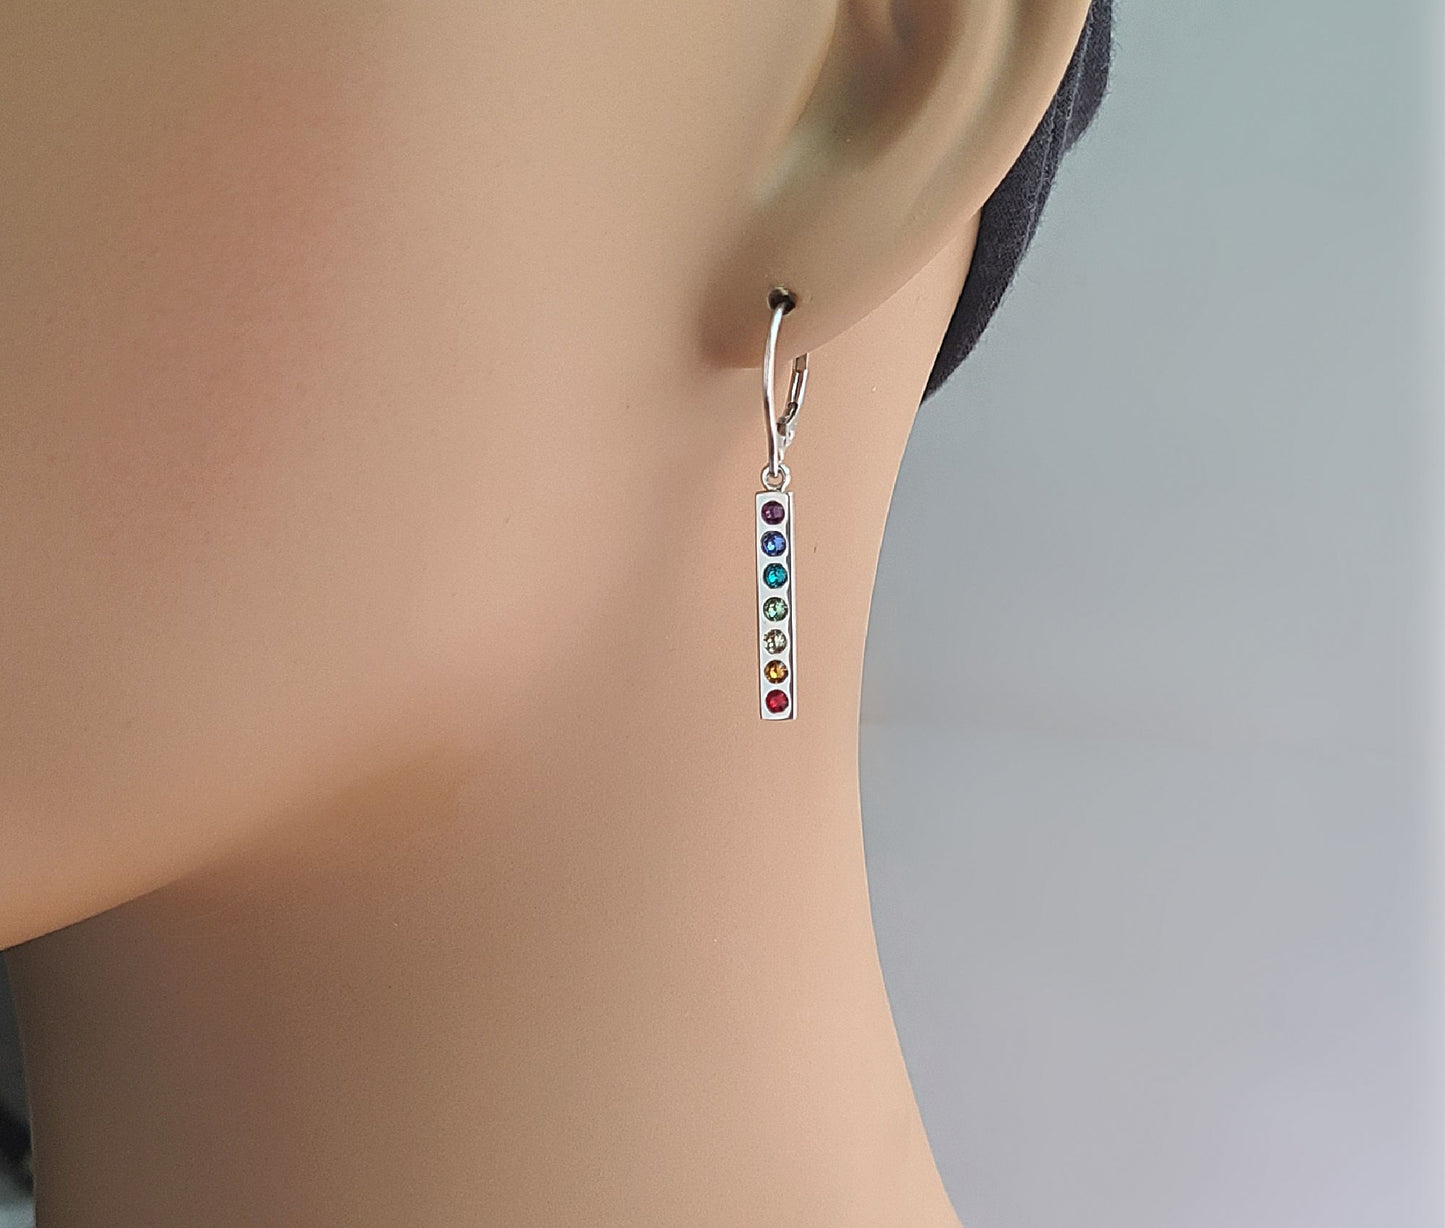 Sterling Silver Small Bar Earrings with Swarovski Crystals -- E151